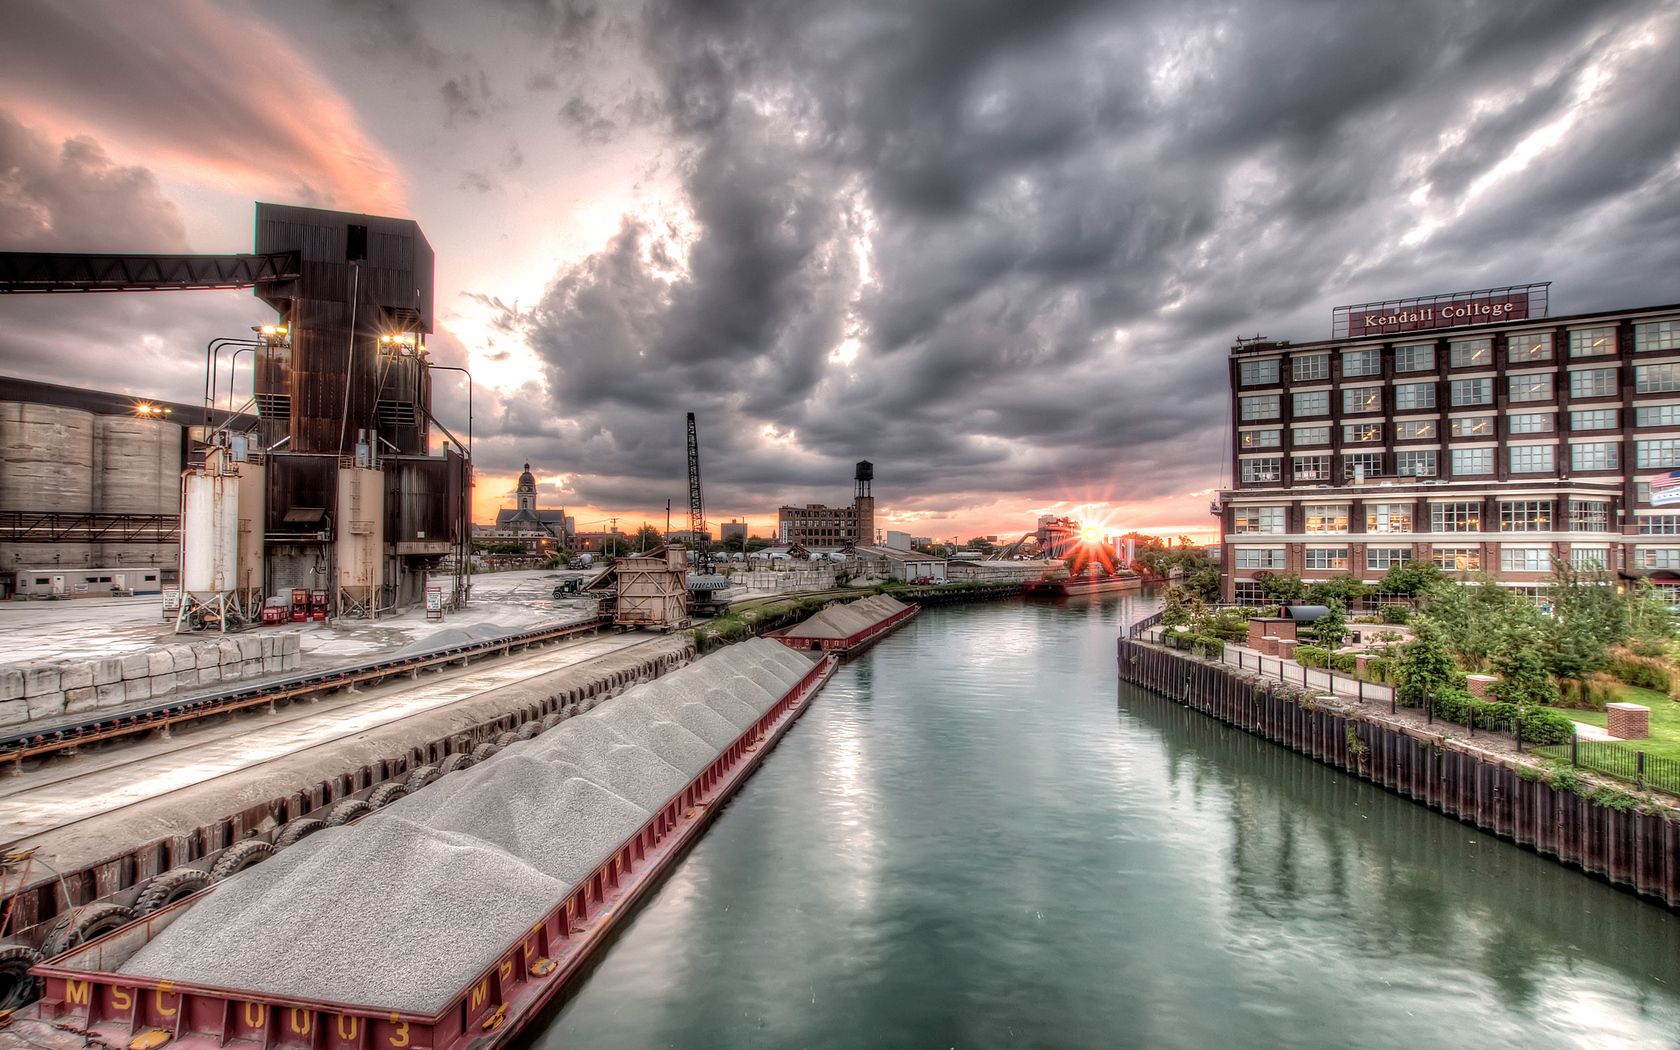 Windows Backgrounds rivers, cities, building, hdr, chicago, illinois, constructions, facilities